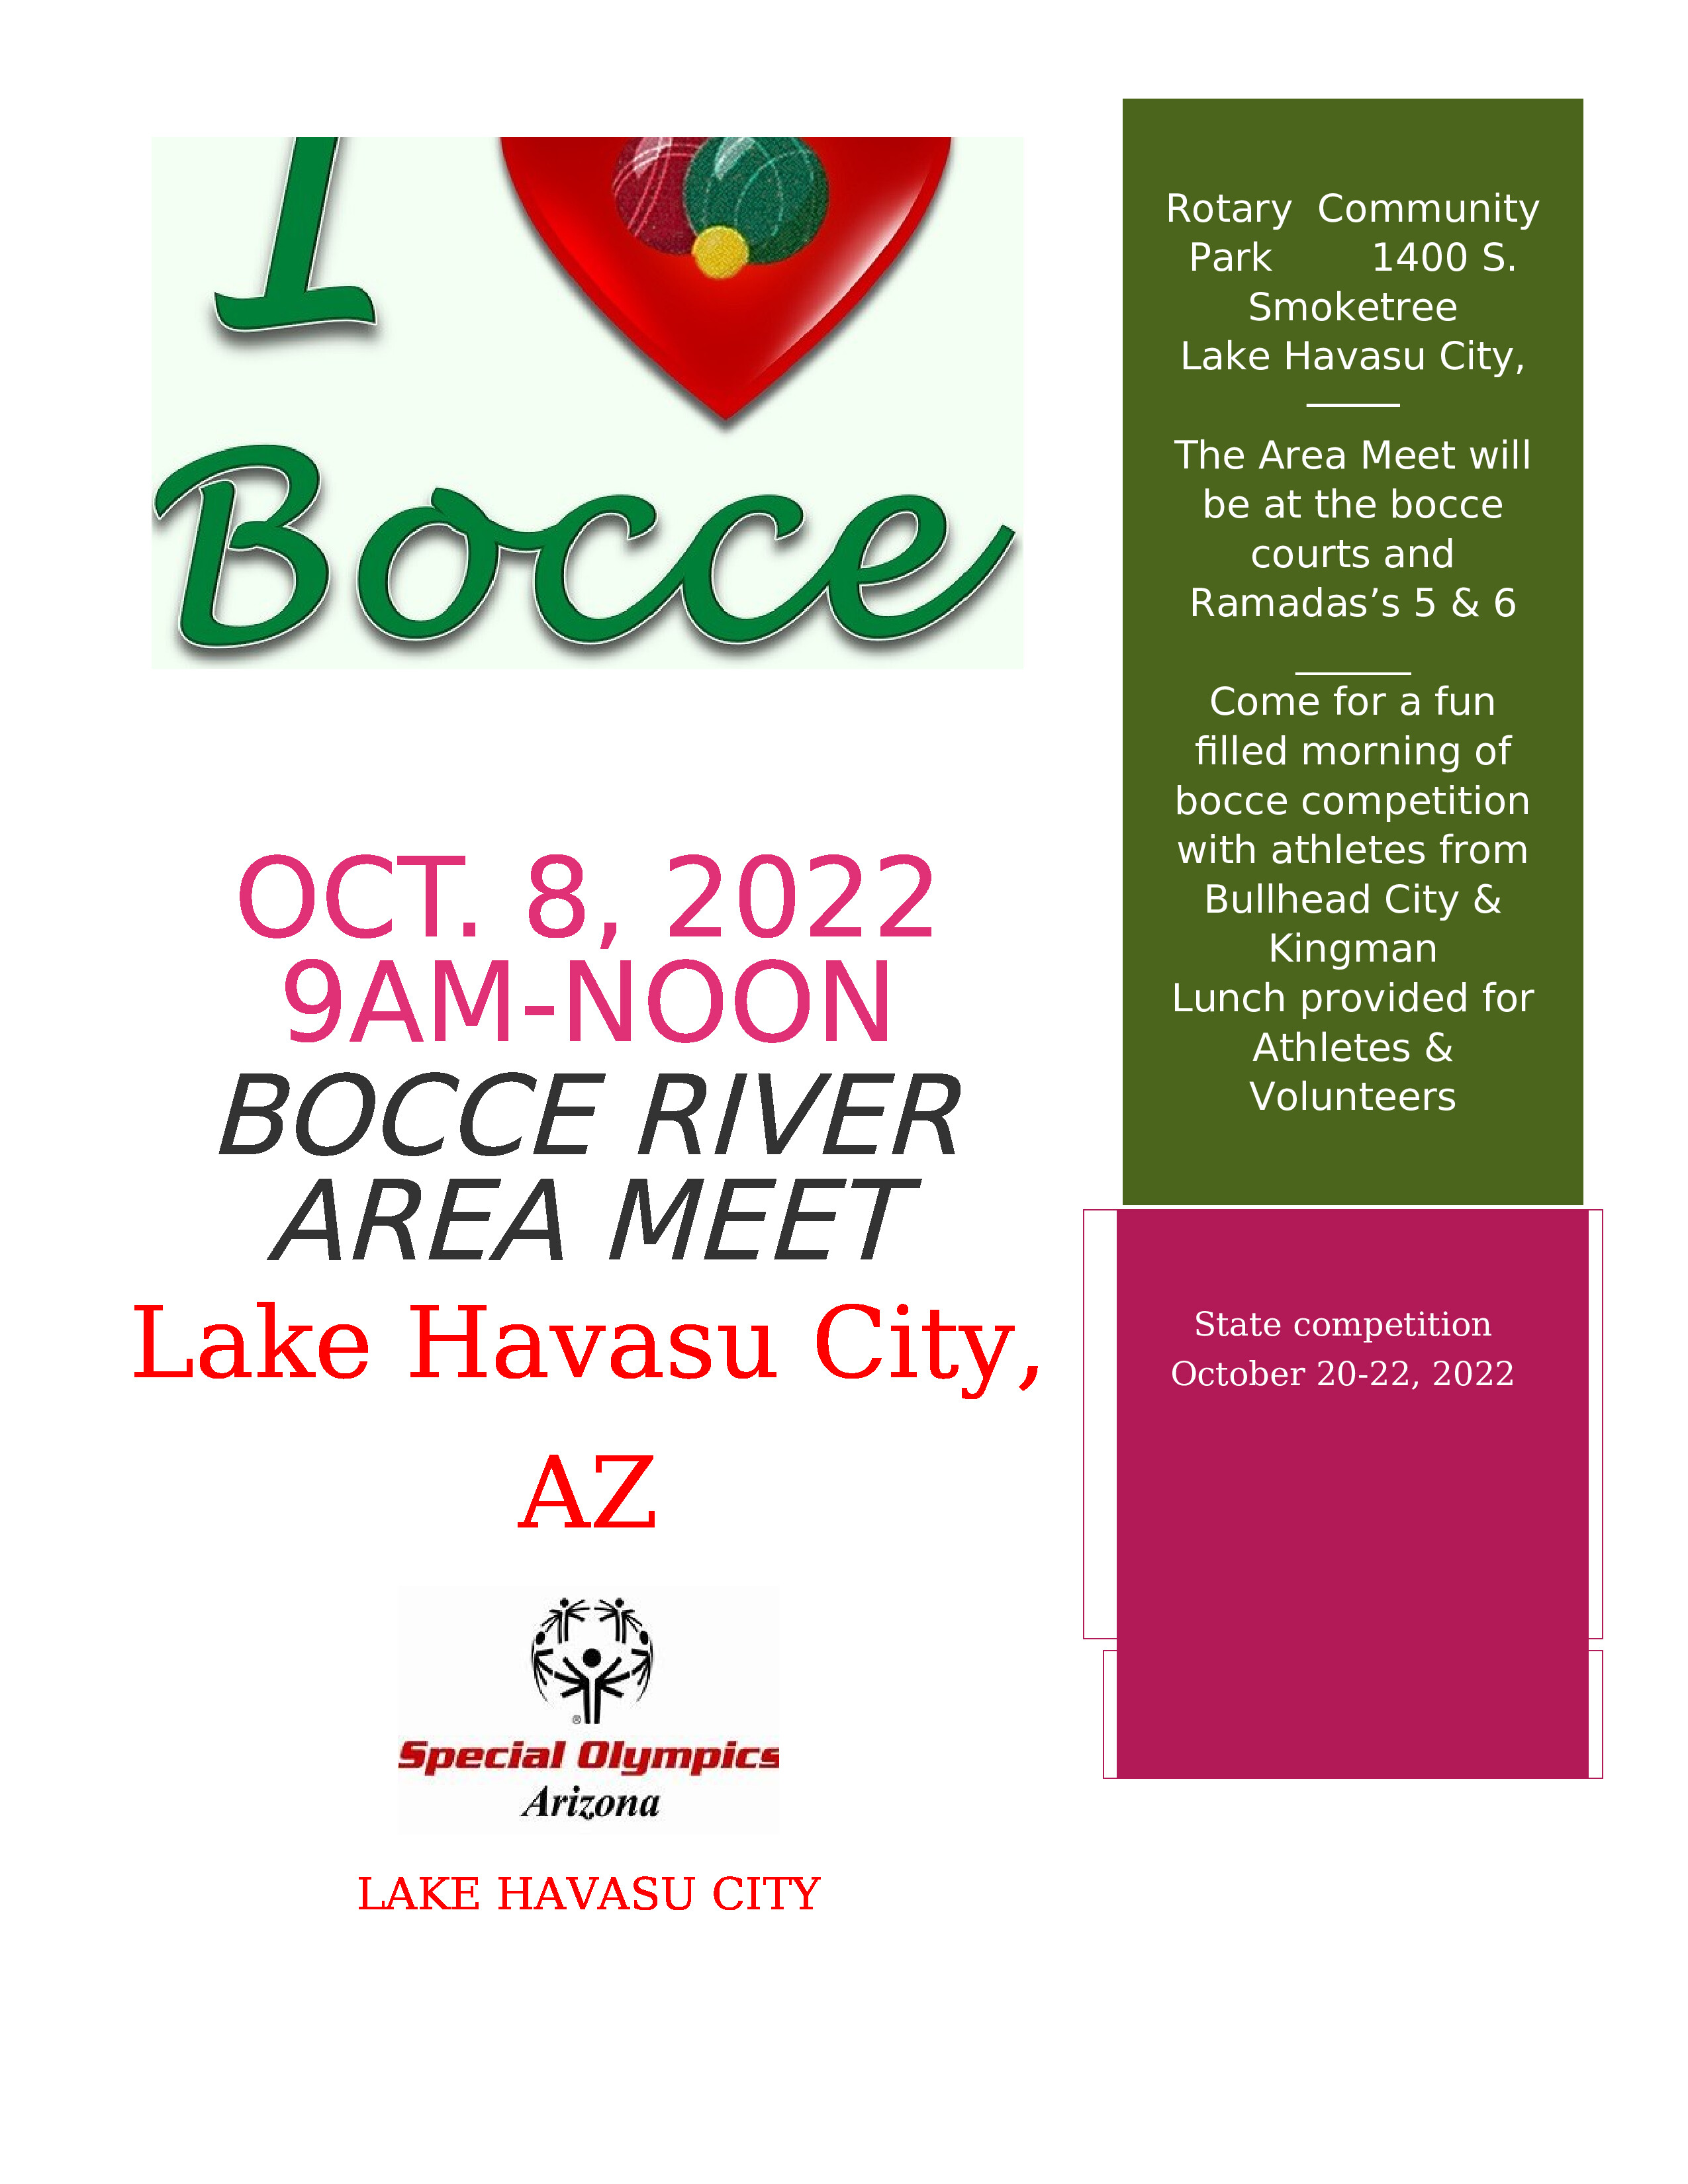 Special Olympics River Area Bocce Meet